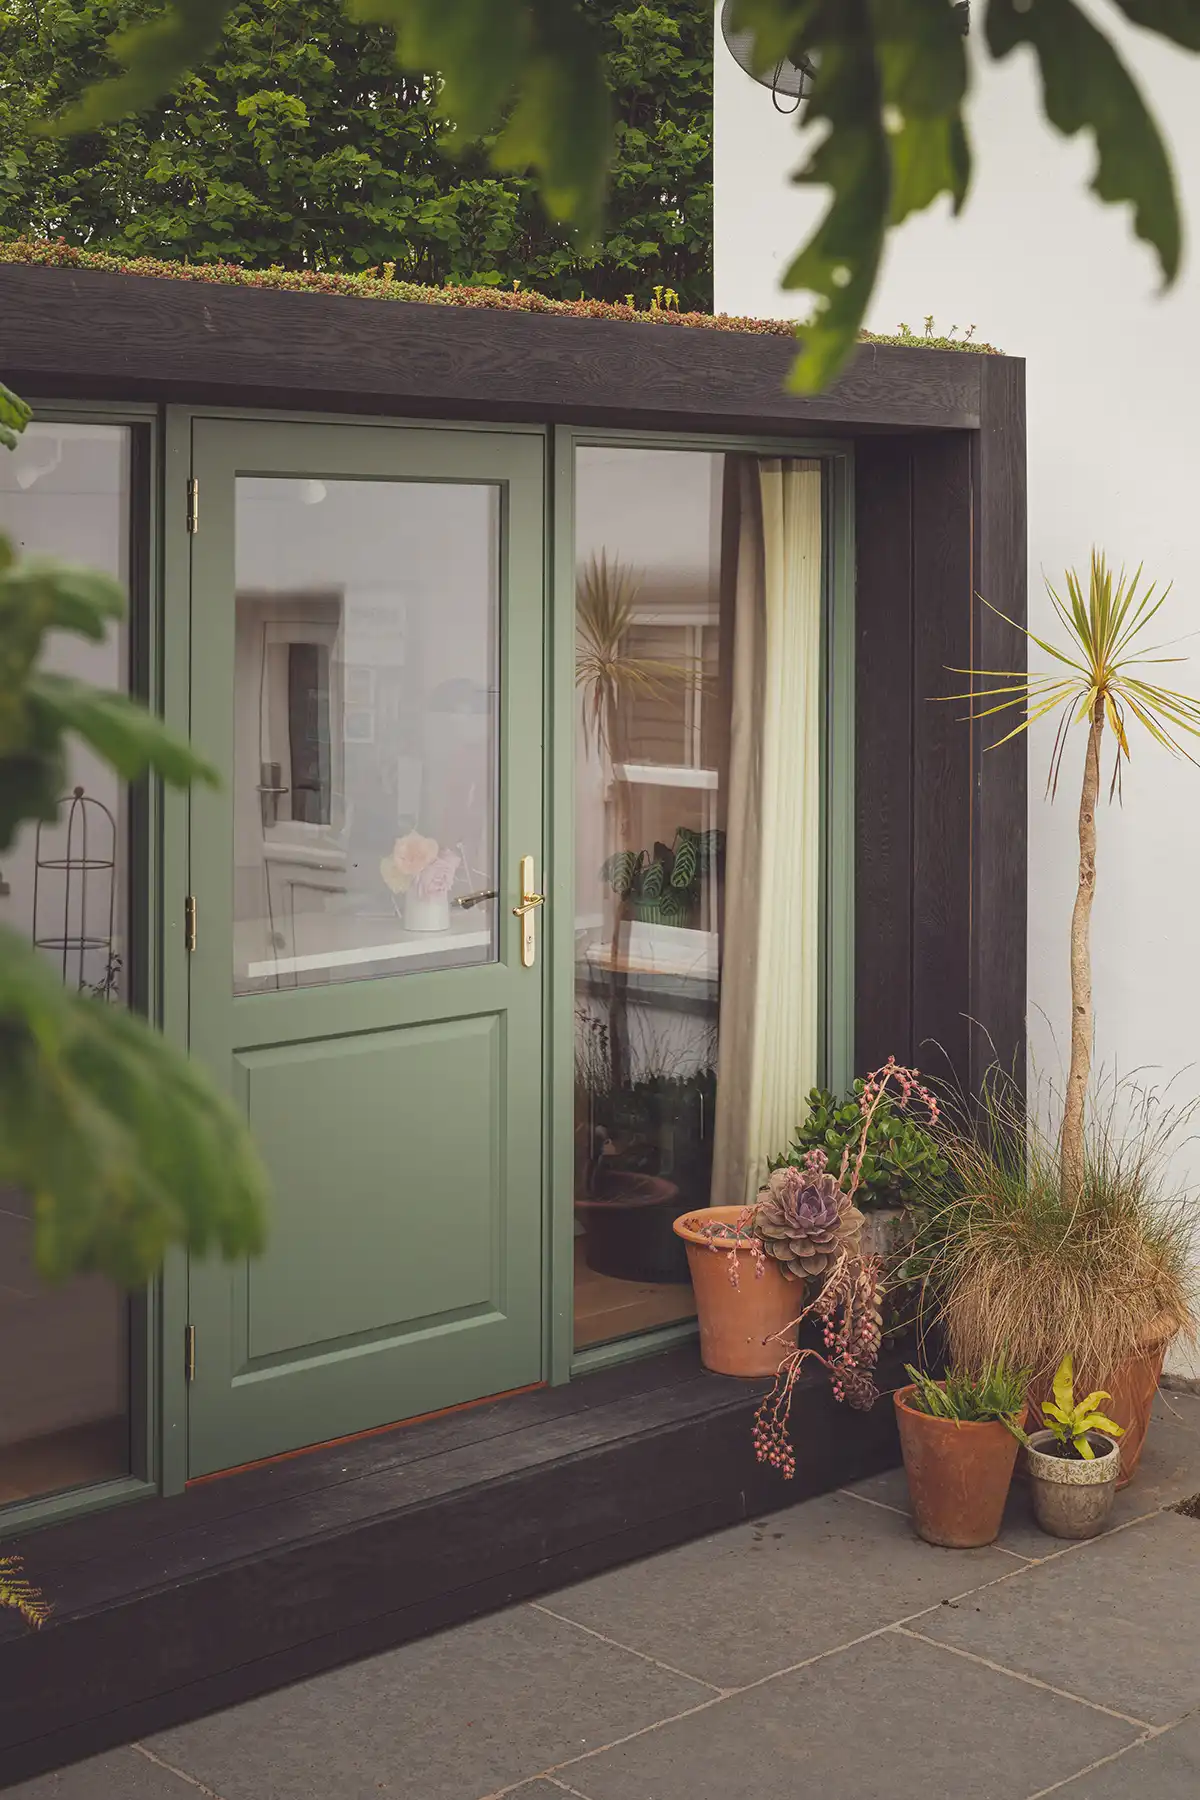 a garden room with a green door, glass panel window, sedum living roof and a collection of plant pots